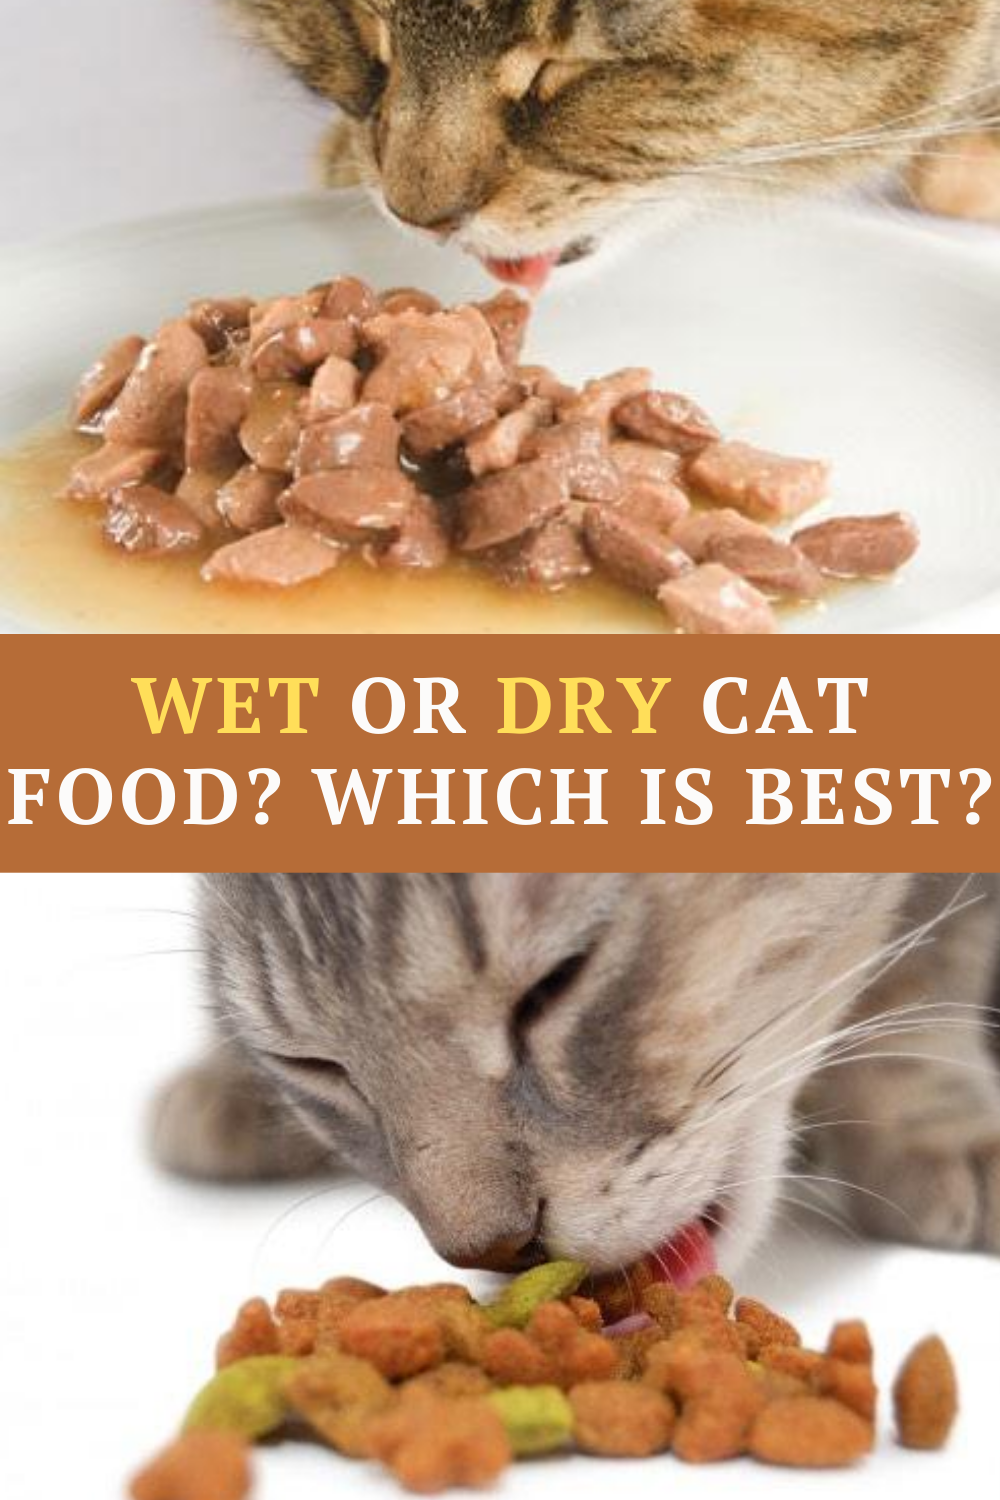 Wet Or Dry Cat Food? What Should You Feed Your Cat?